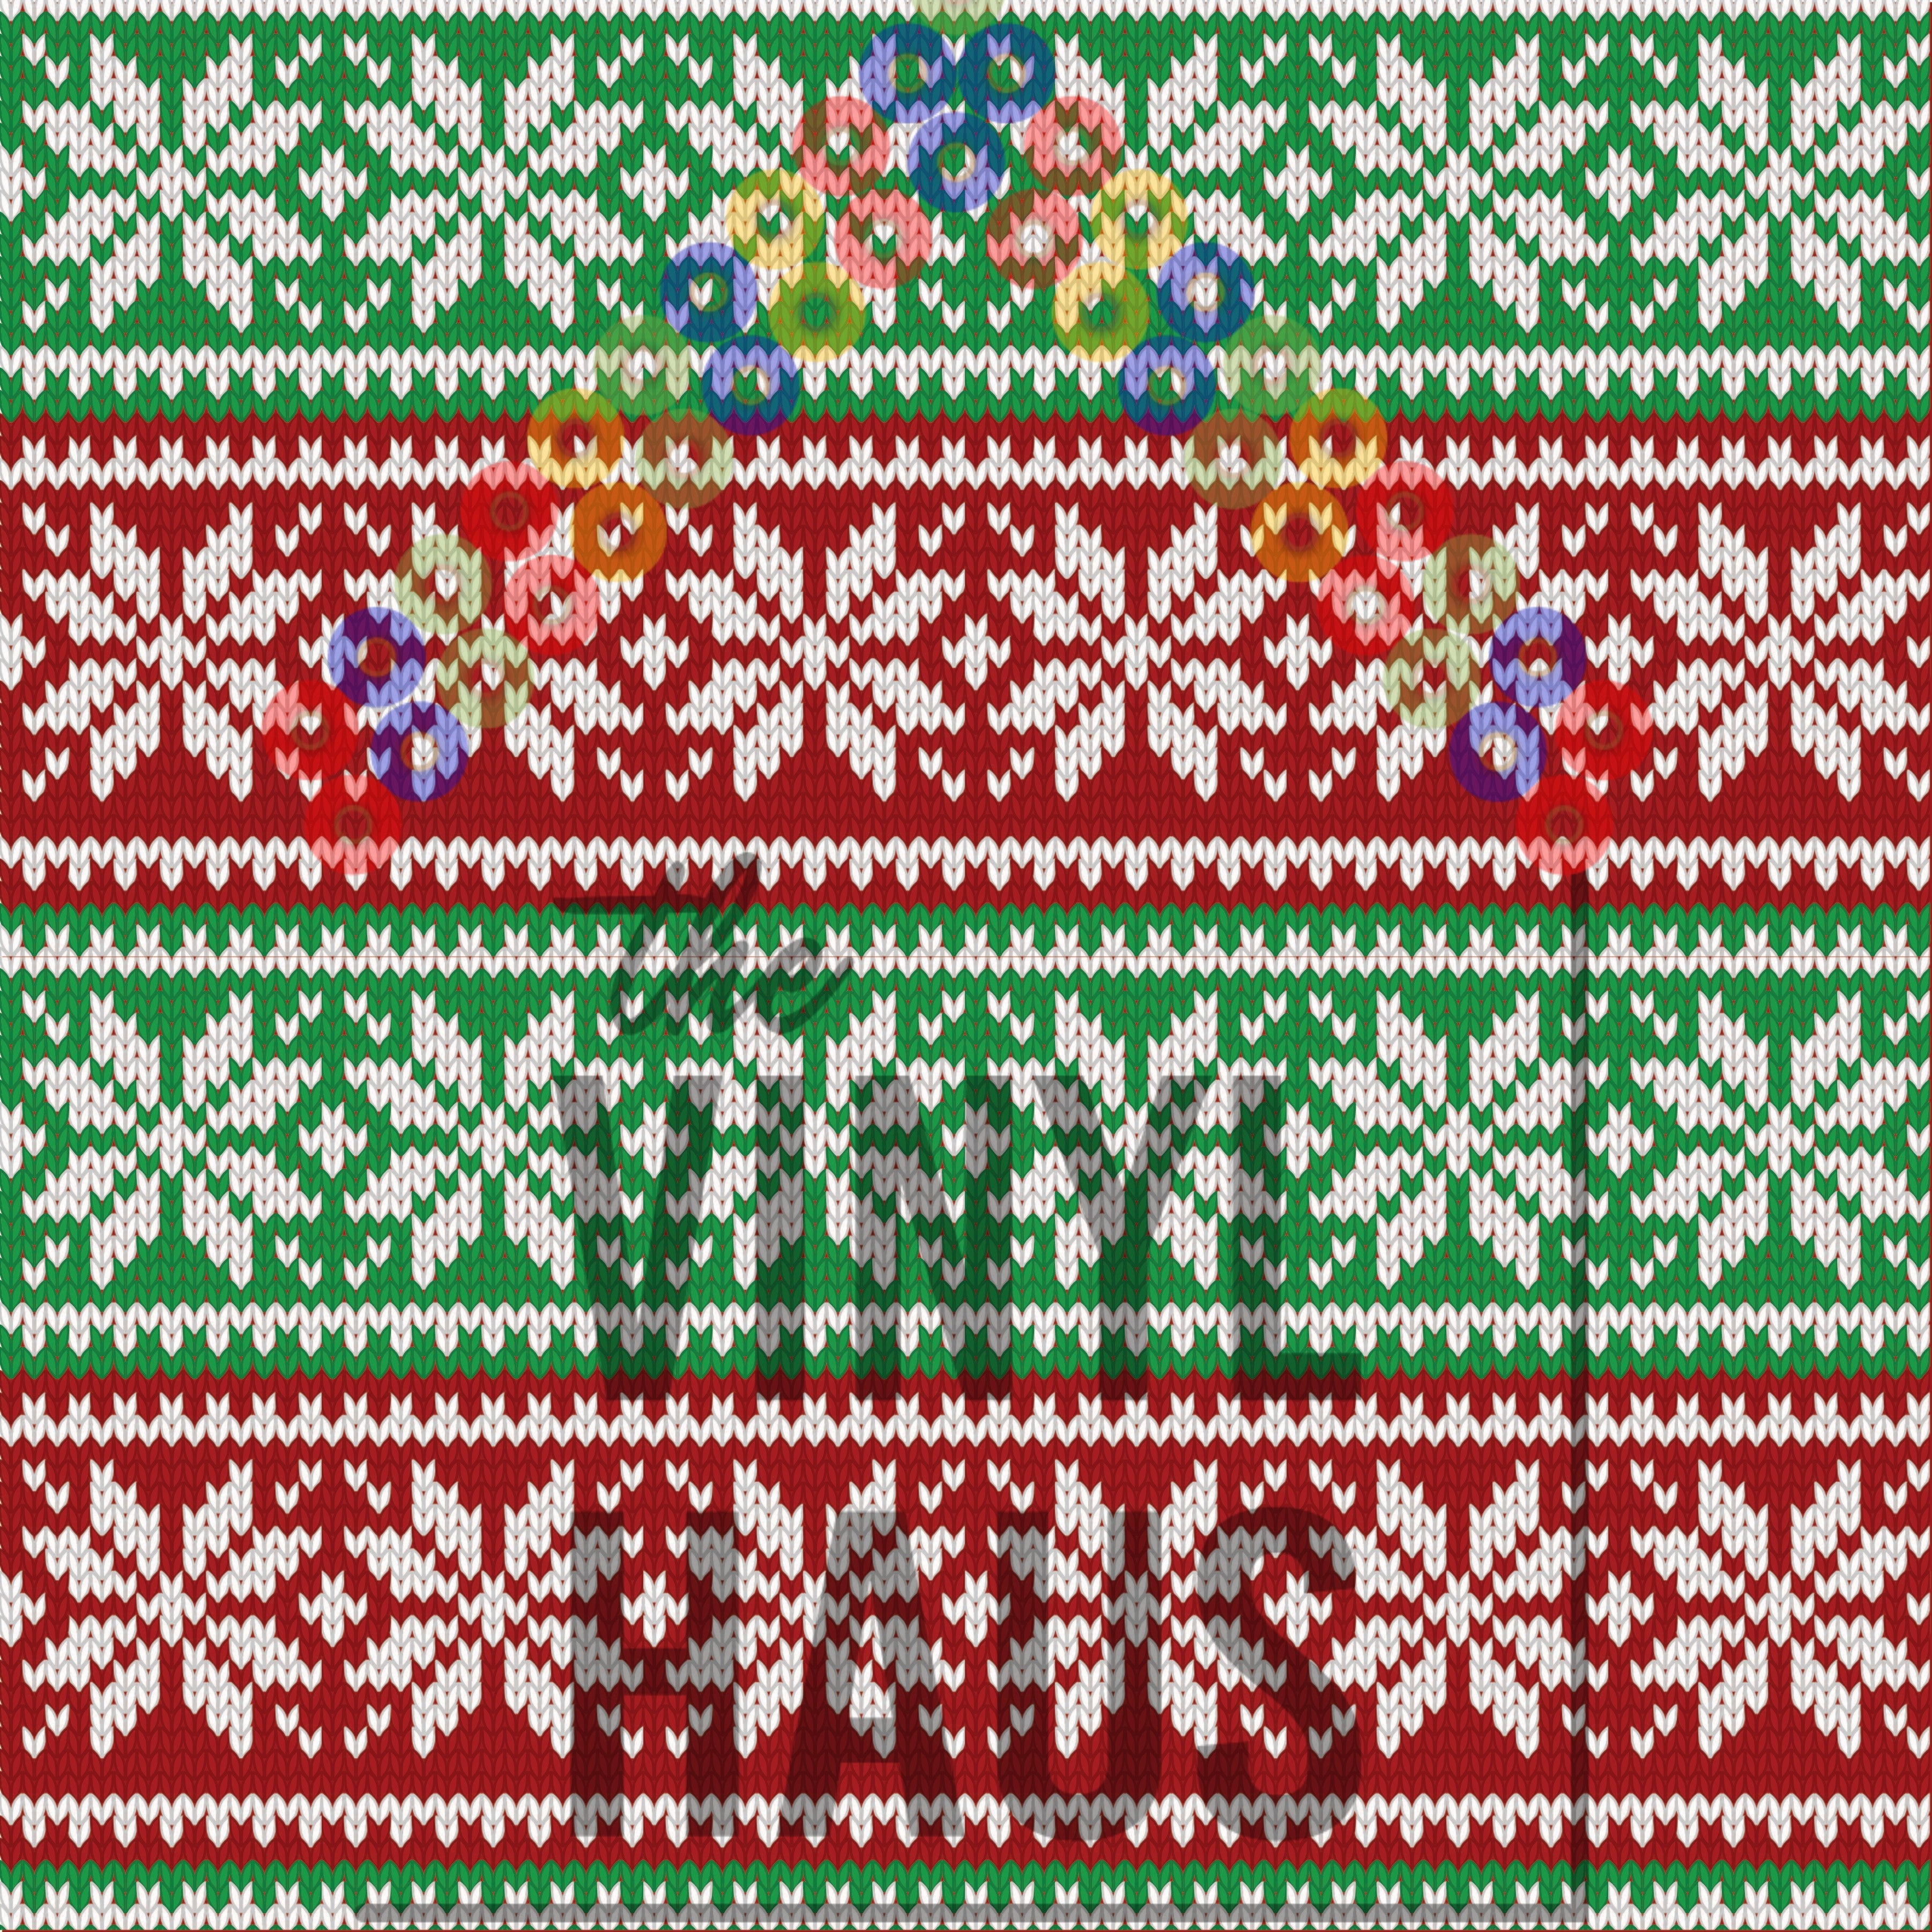 Ugly Sweater Christmas Snowflakes Red/Green/White Pattern Vinyl 12" x 12" - The Vinyl Haus